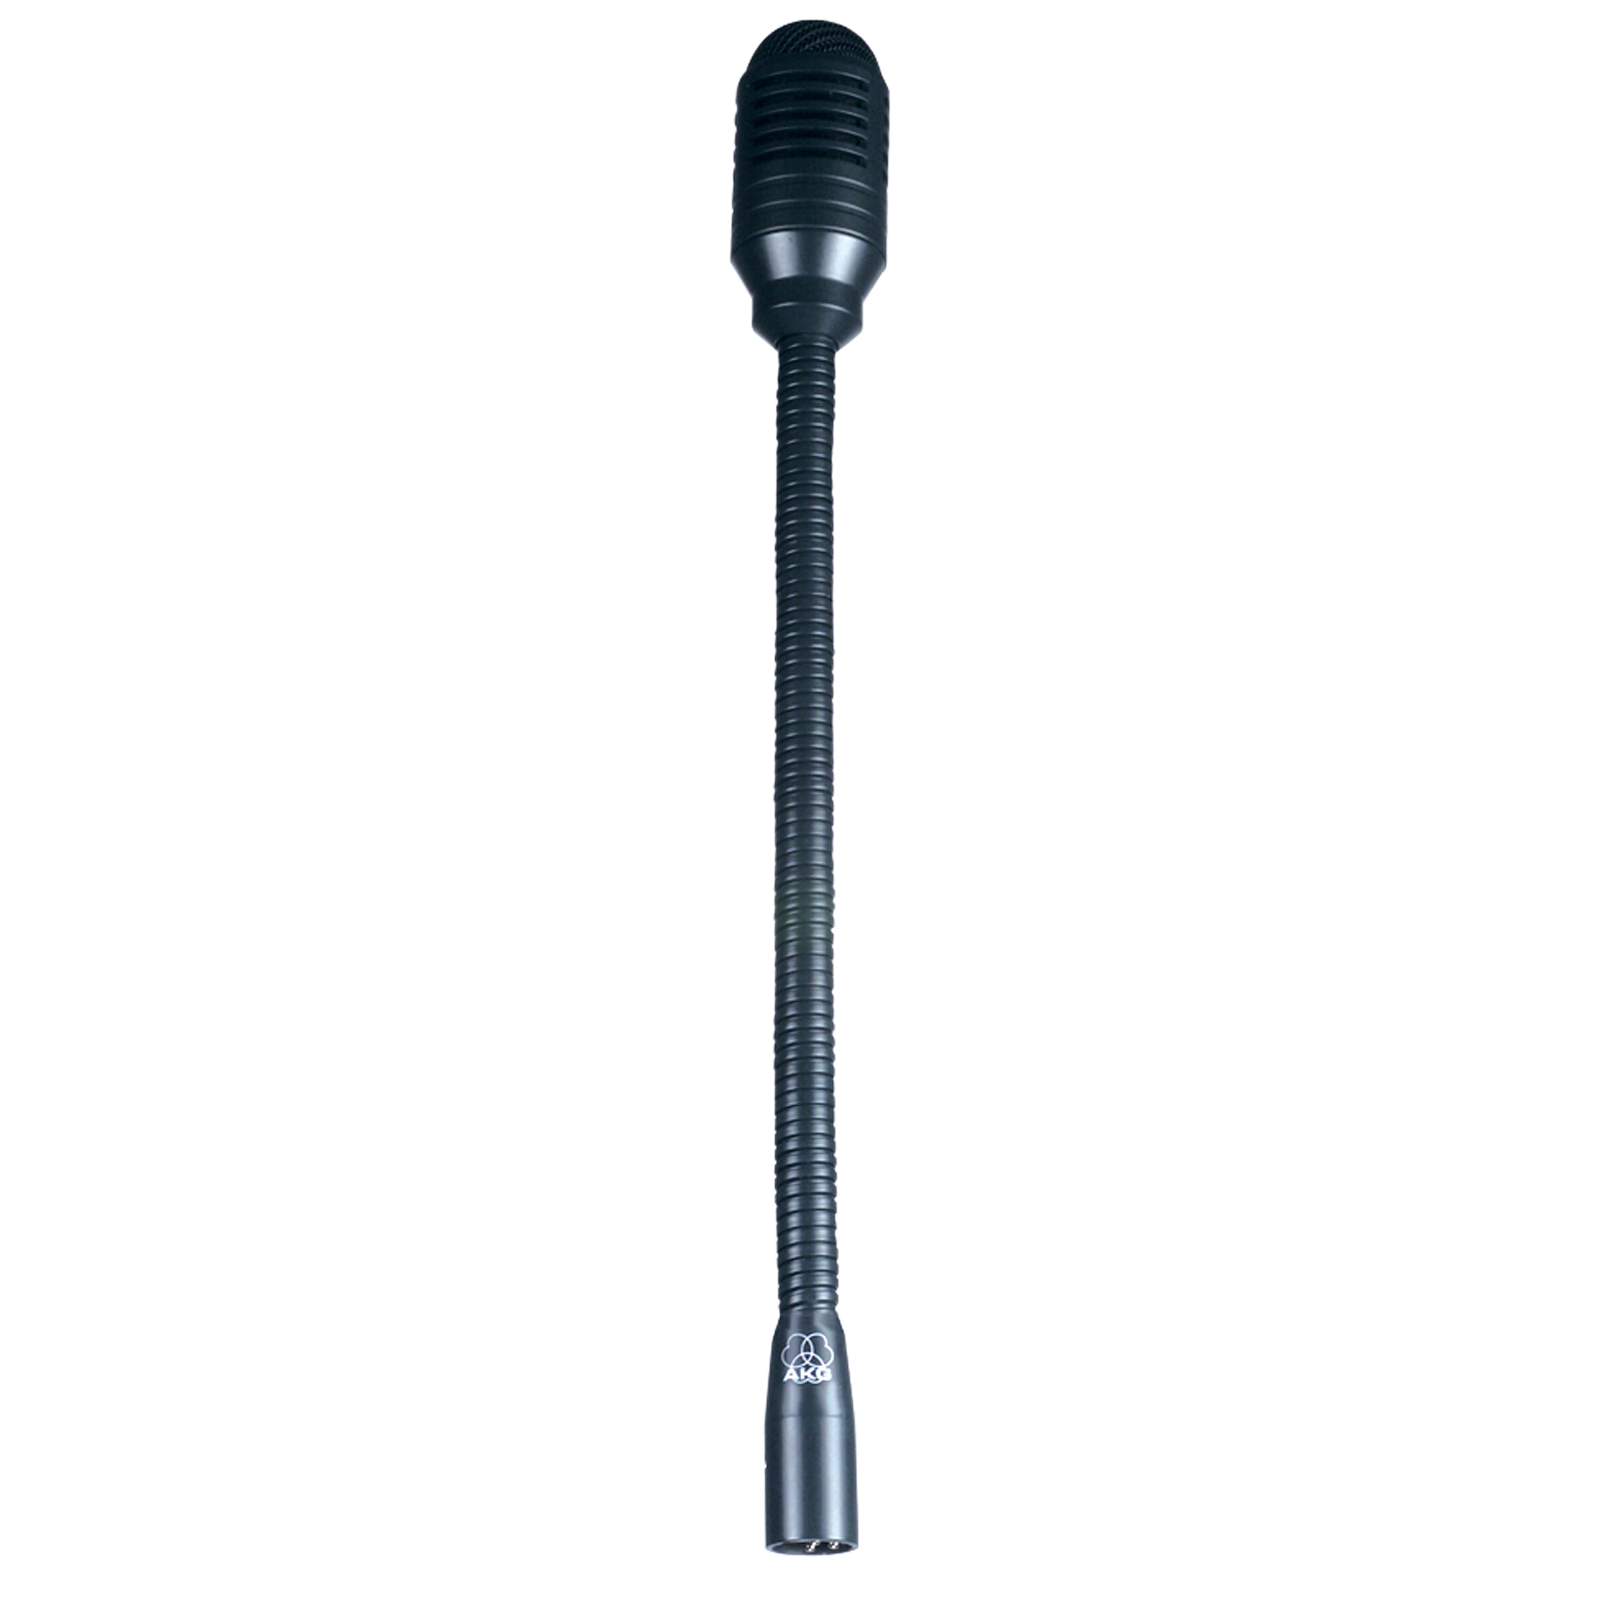 DGN99 E (B-Stock) - Black - Dynamic gooseneck microphone with integrated XLR connector - Hero